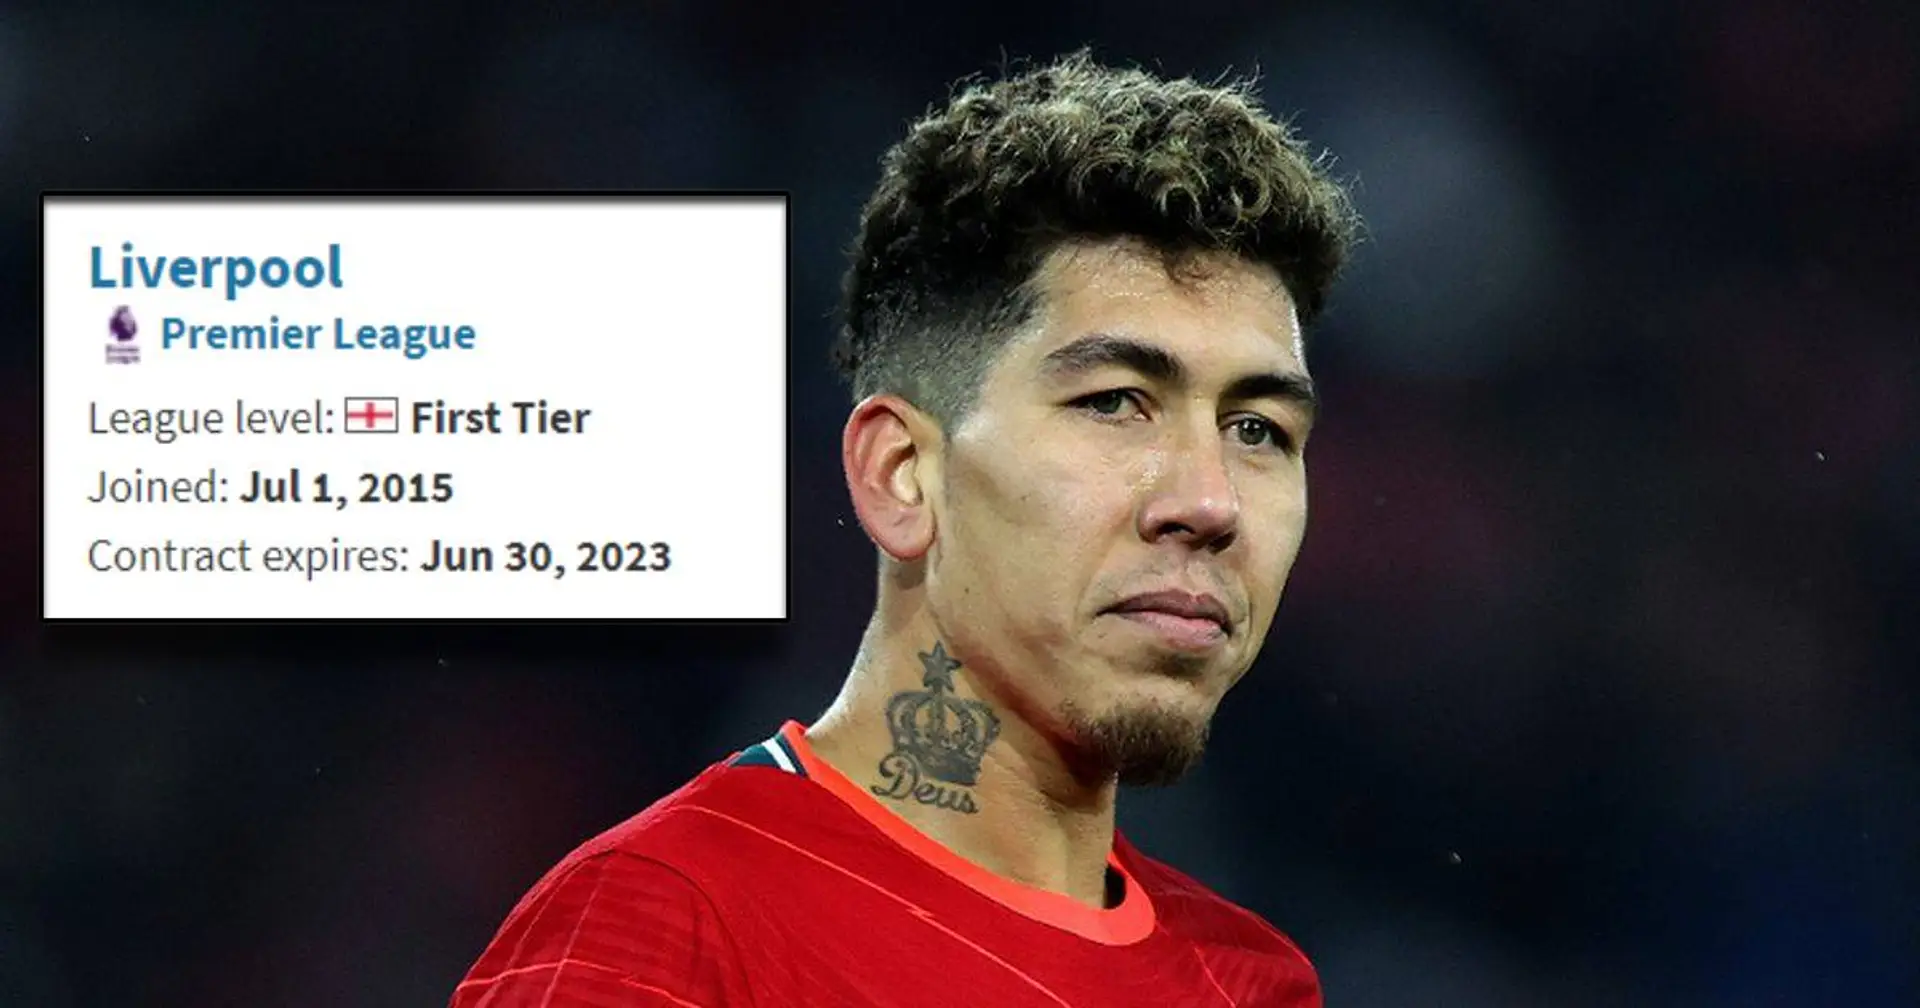 Juventus 'reckon' they can sign Firmino for £20m, Liverpool's stance on transfer revealed (reliability: 3 stars)